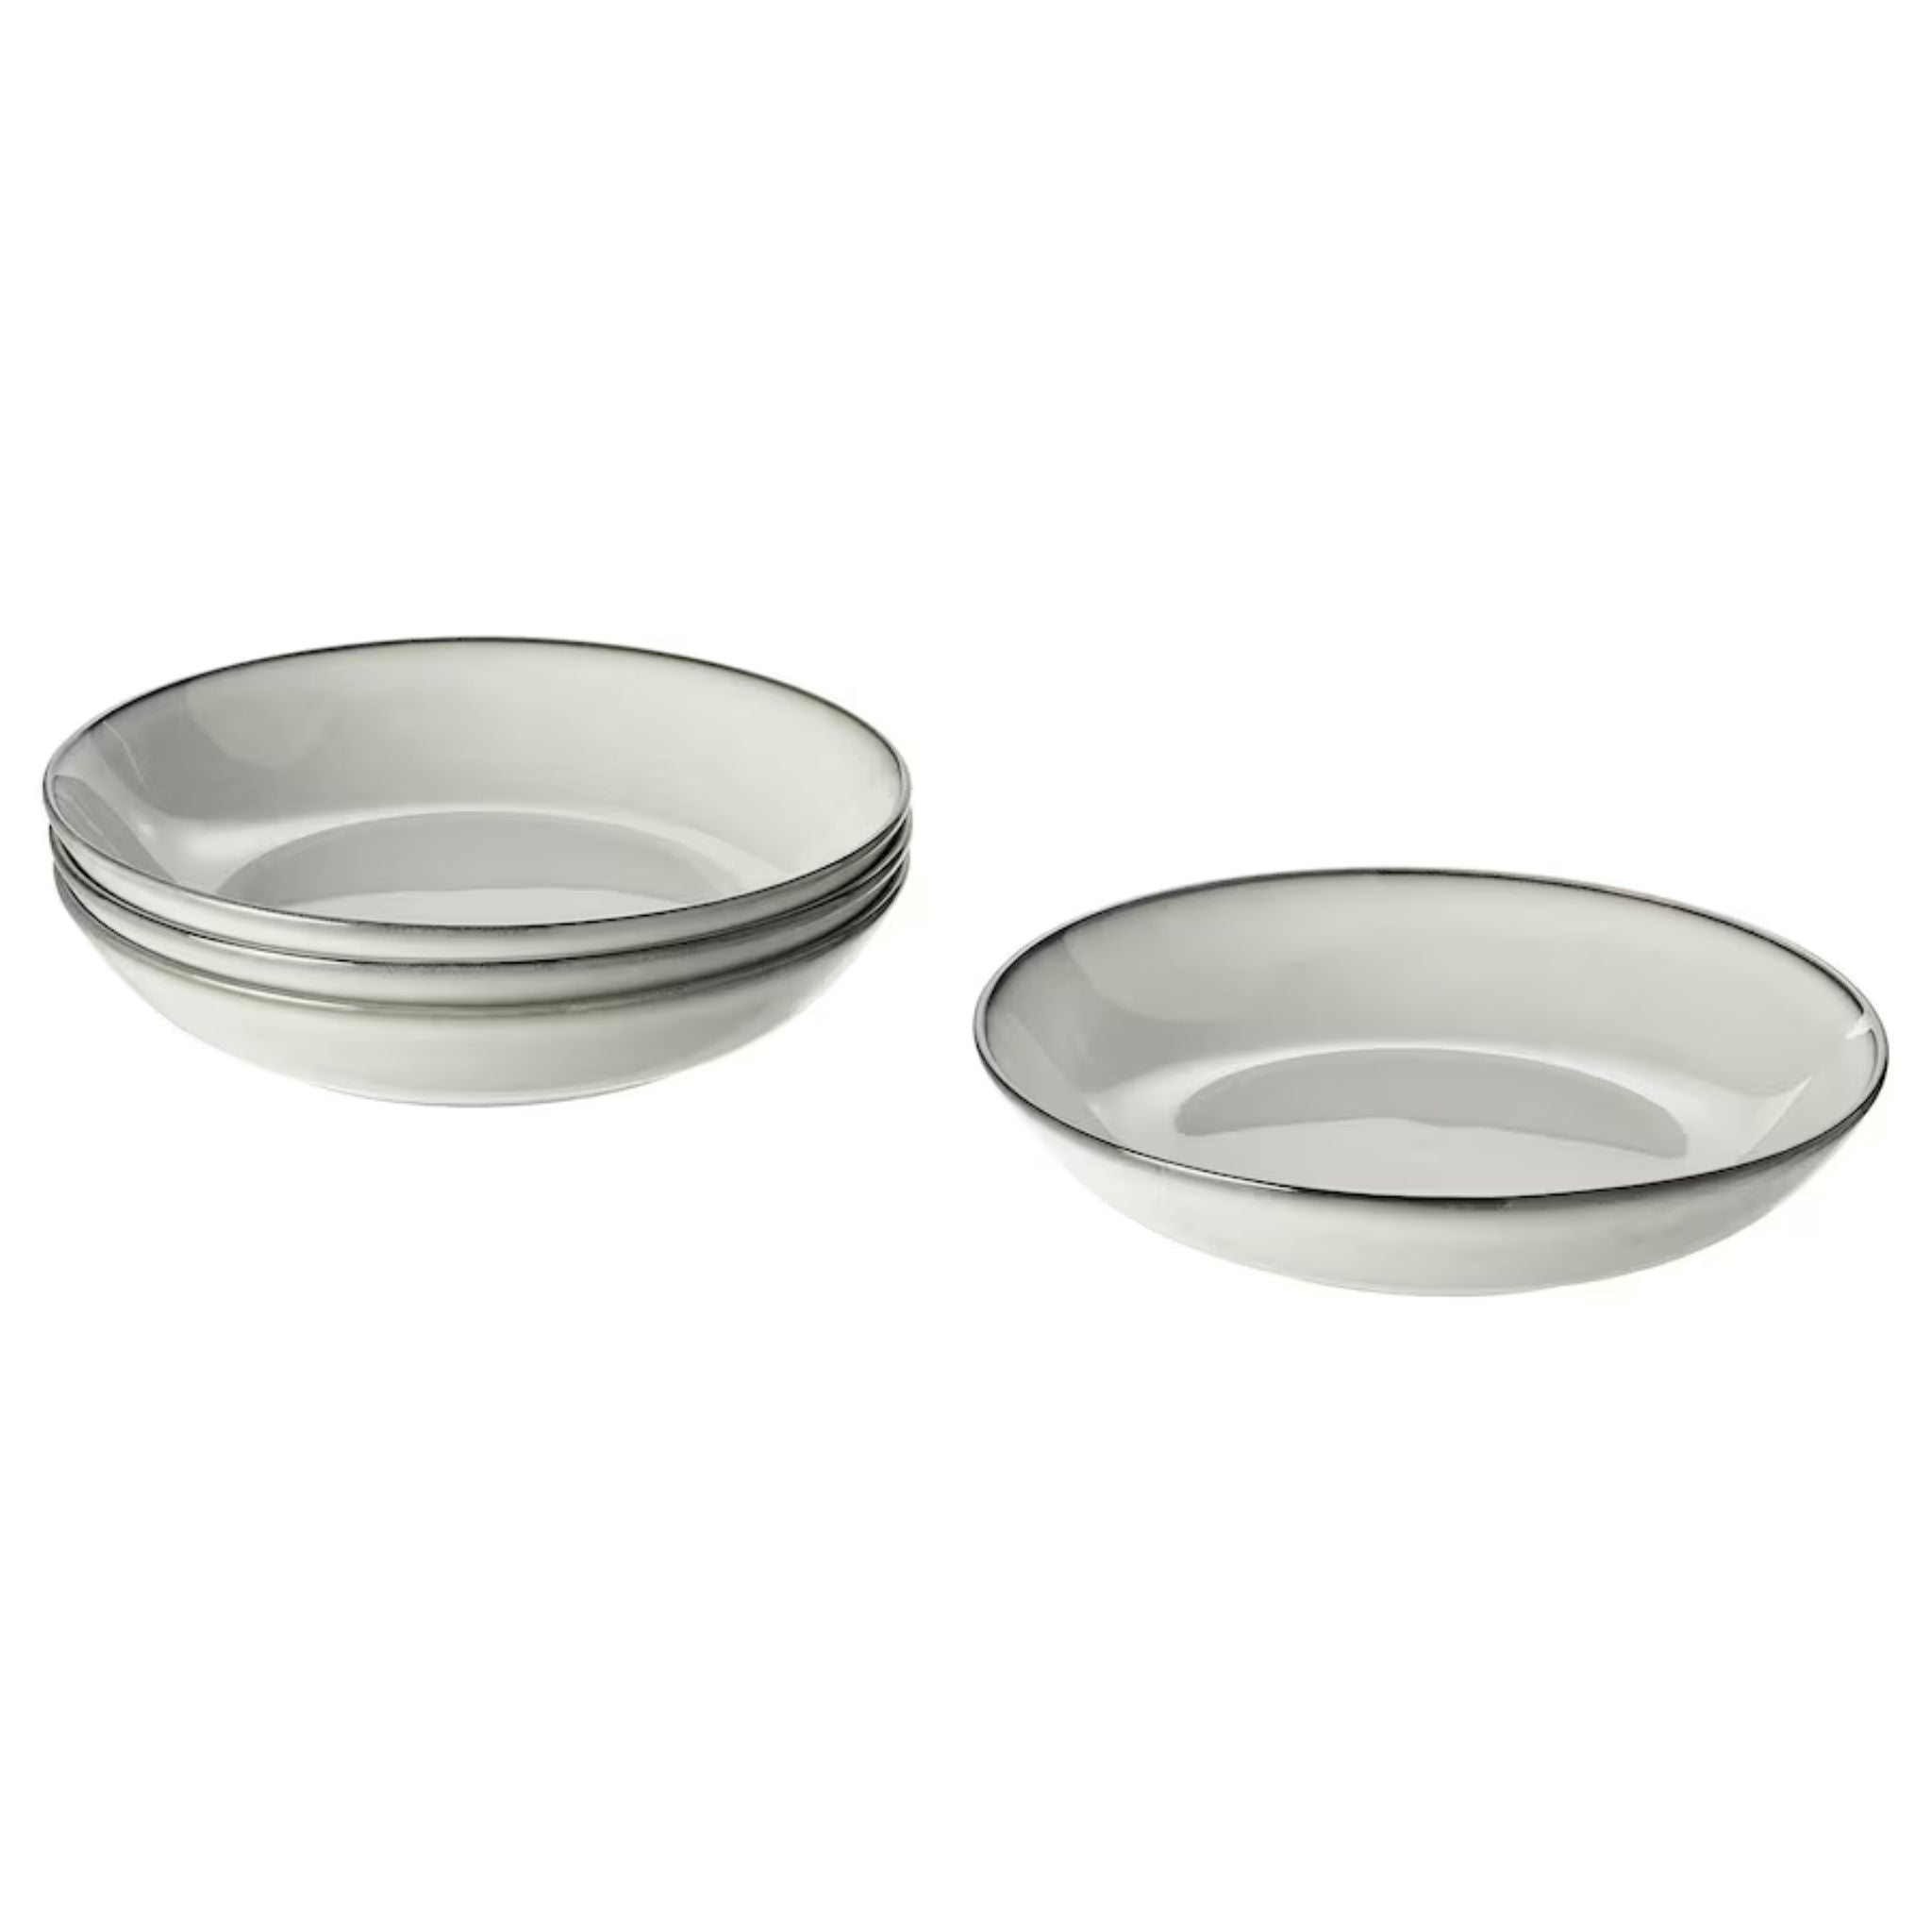 Passo Snack Plate / Bowl - Set of 4